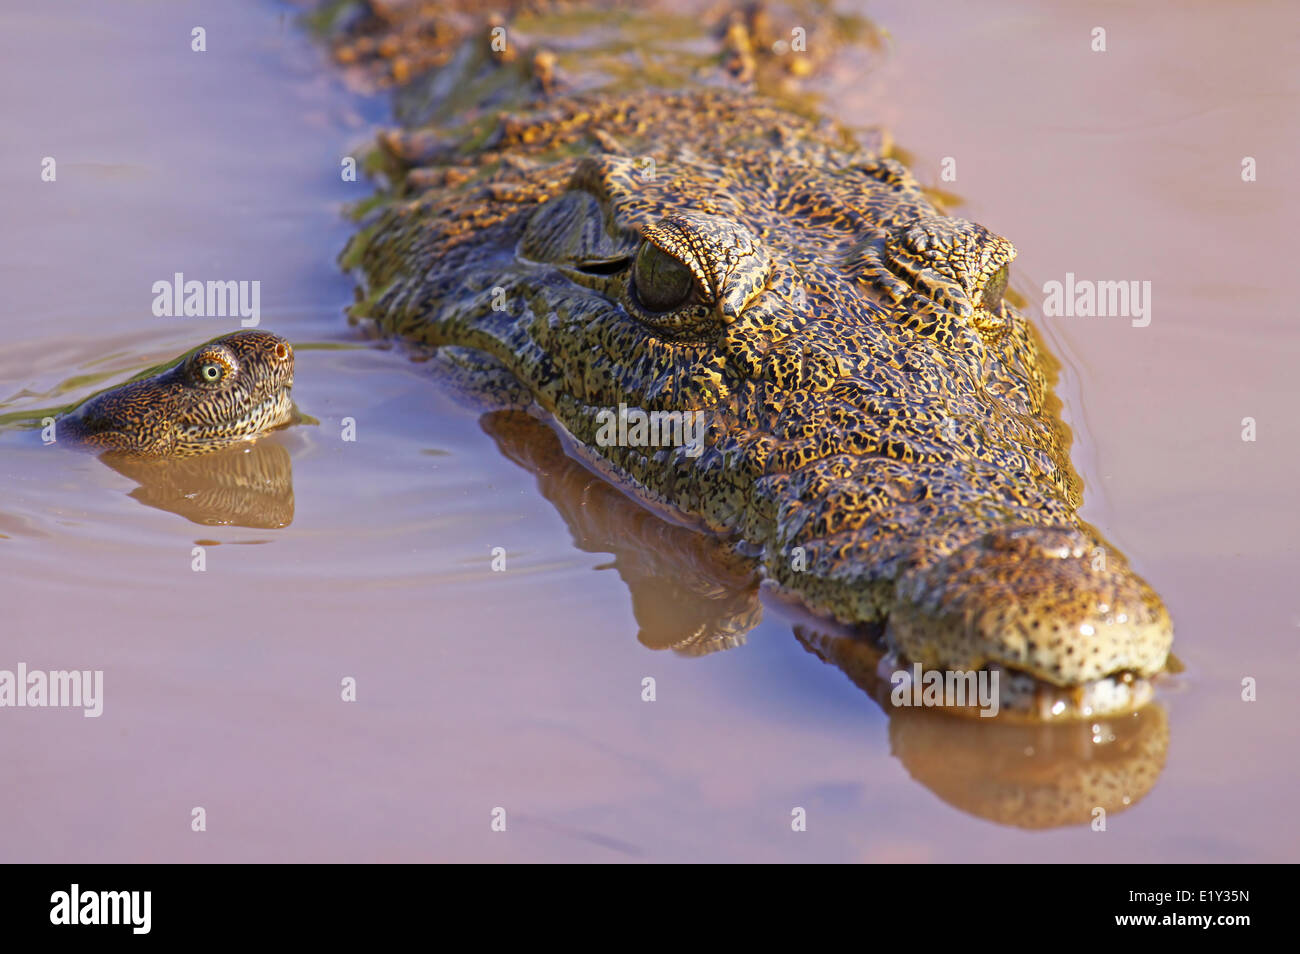 Crocodile and turtle, south africa Stock Photo